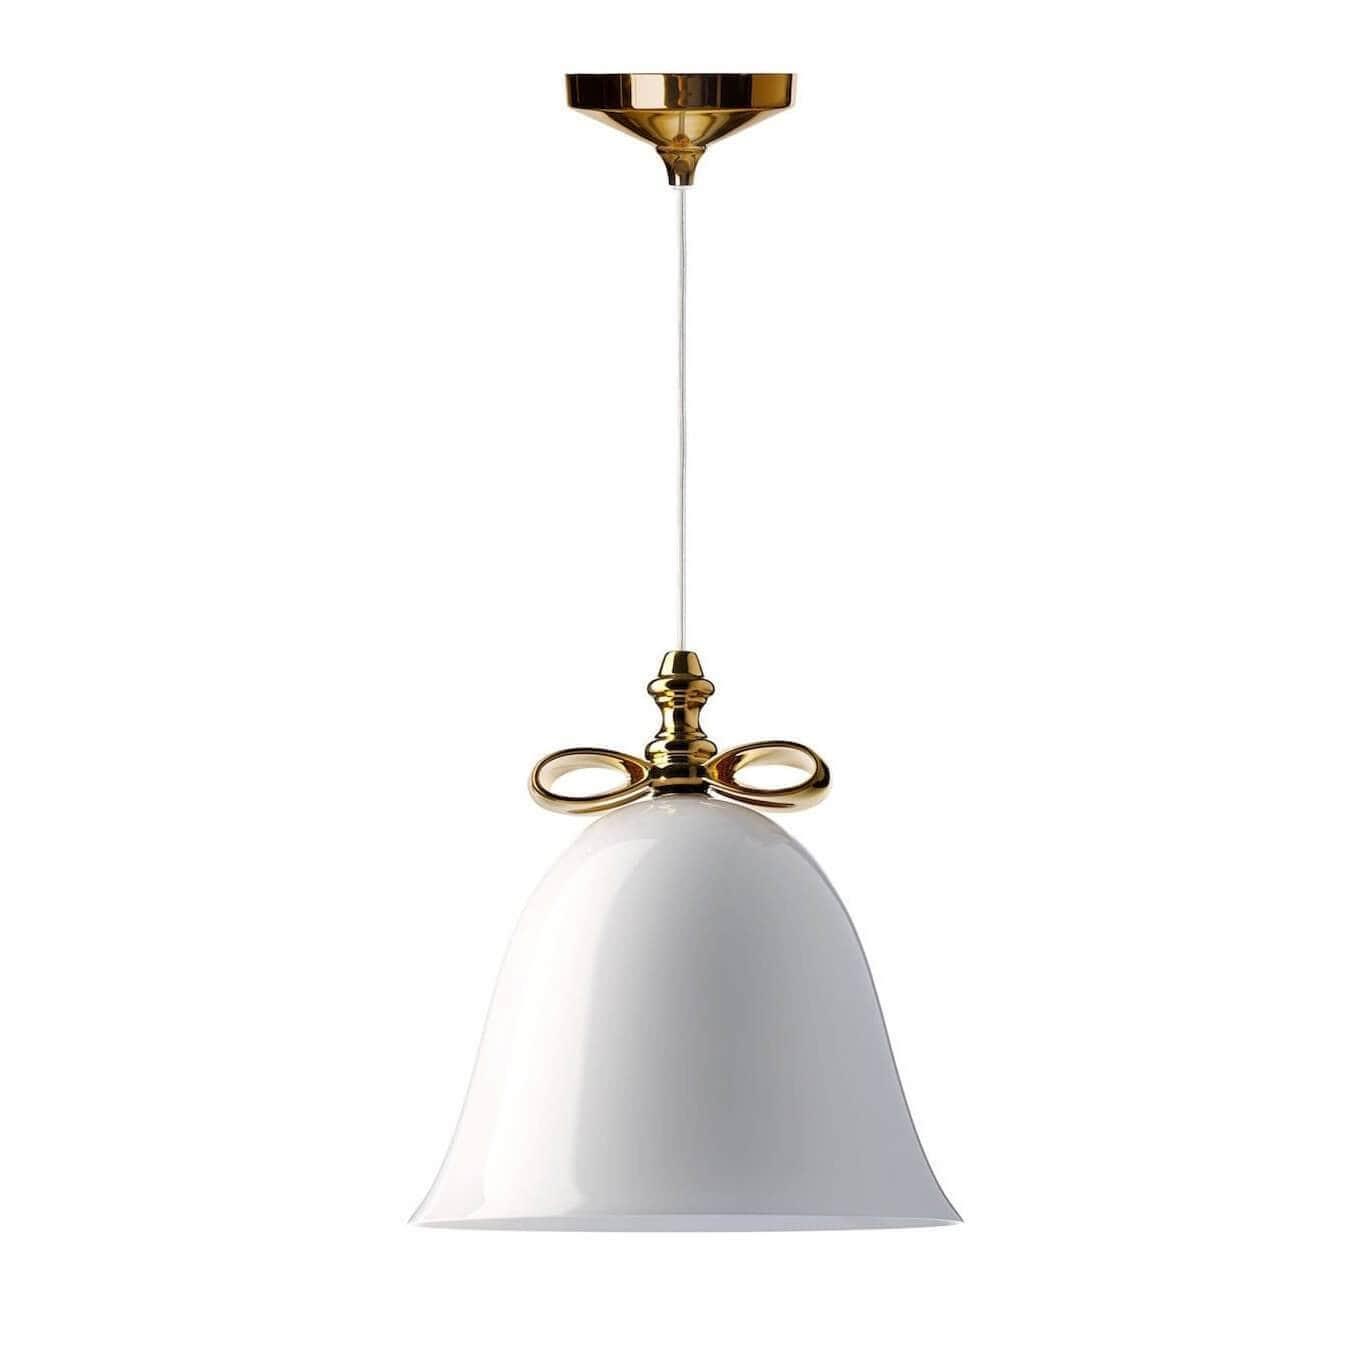 Bell Lamp Suspension Light - Curated - Lighting - Moooi